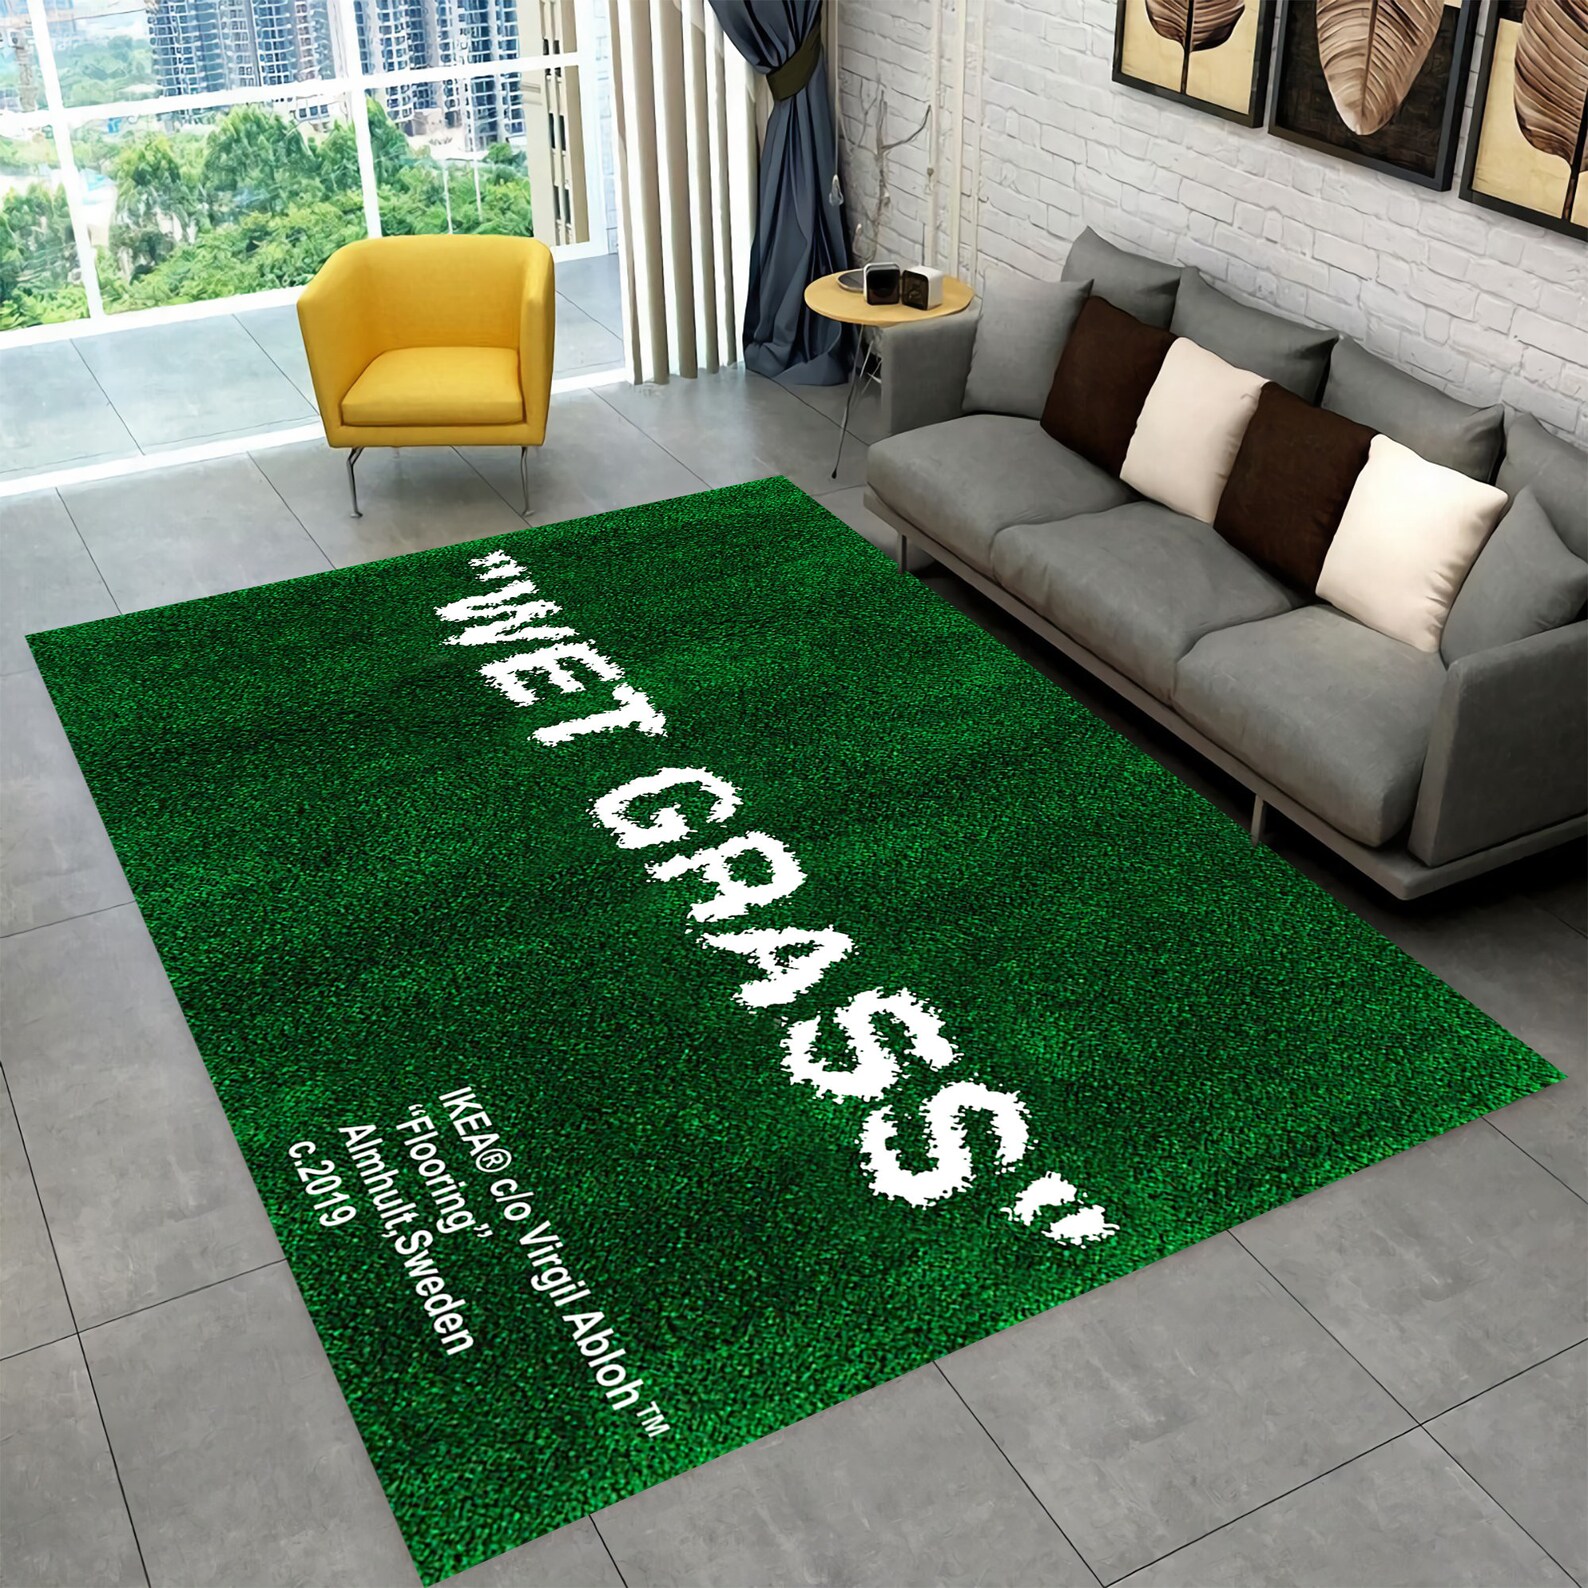 Wet Grass Rug Grass Looking Rug Green Rug Gift for - Etsy